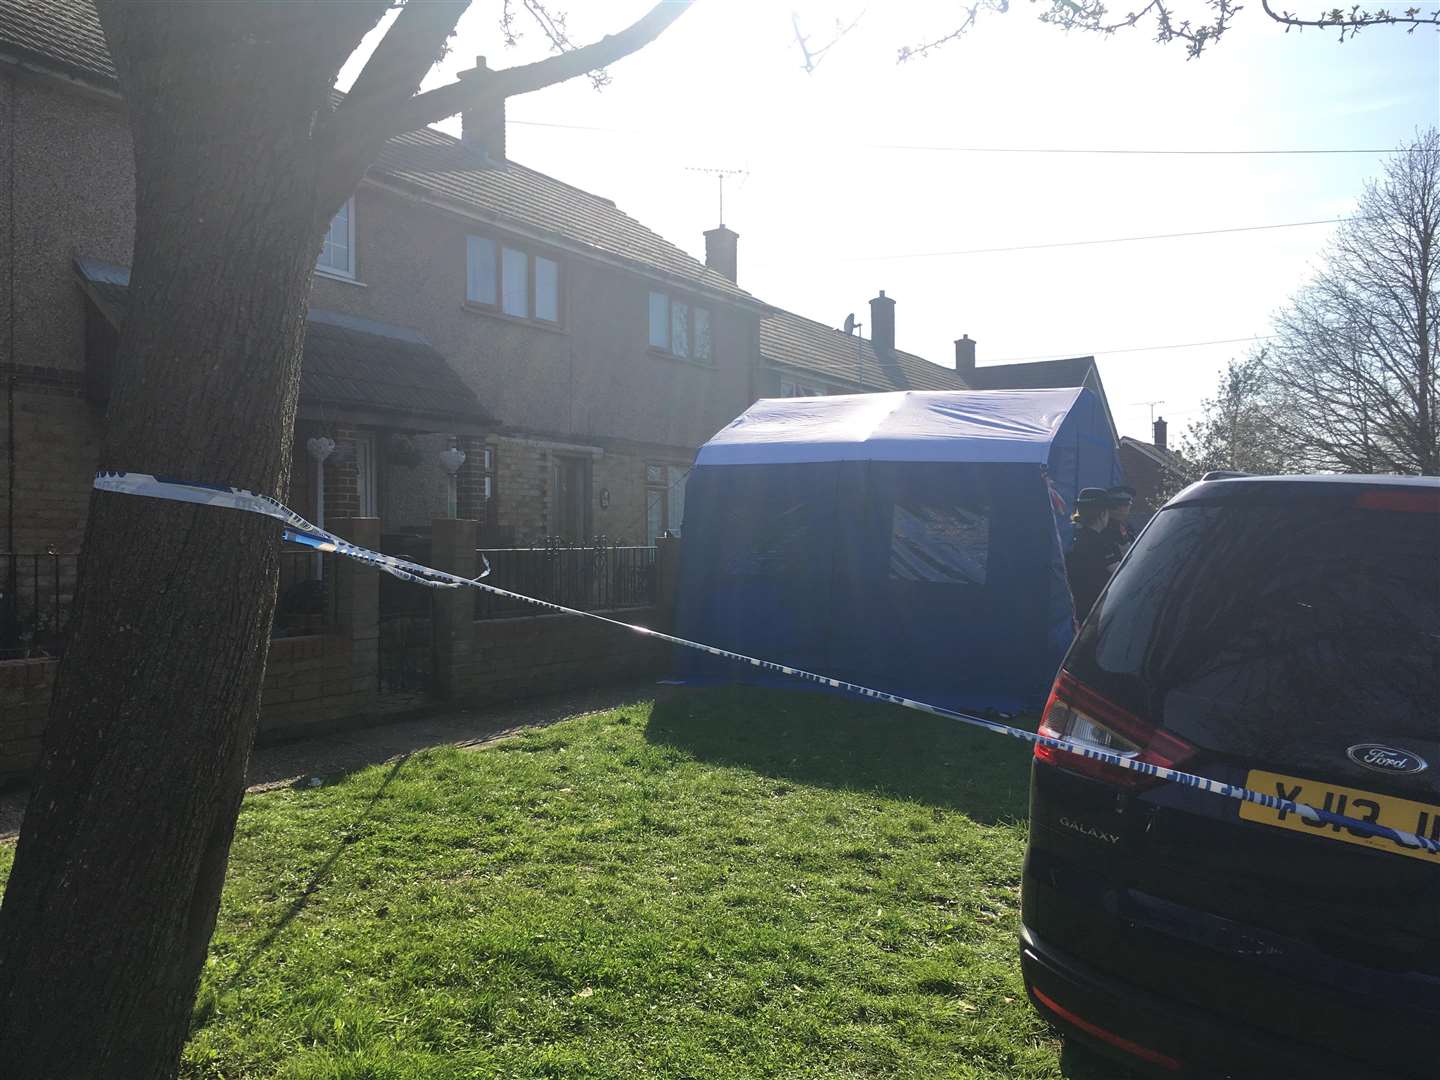 The house in Warren Wood Road was cordoned off by police. (1563139)